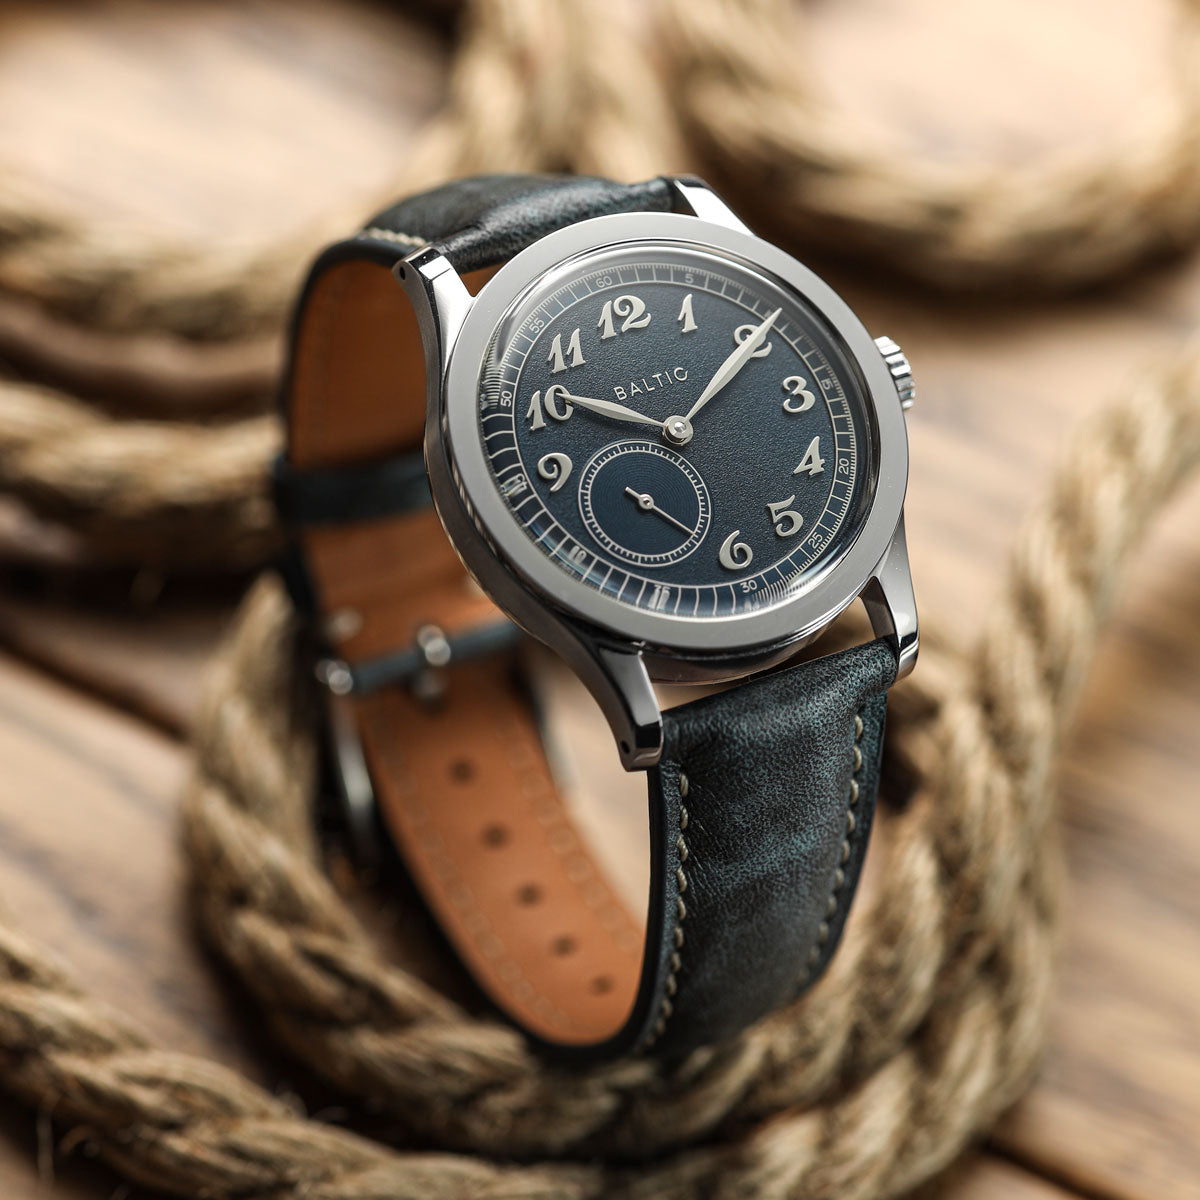 Laverton Padded Patina Calf Leather Watch Strap - Blue Jeans